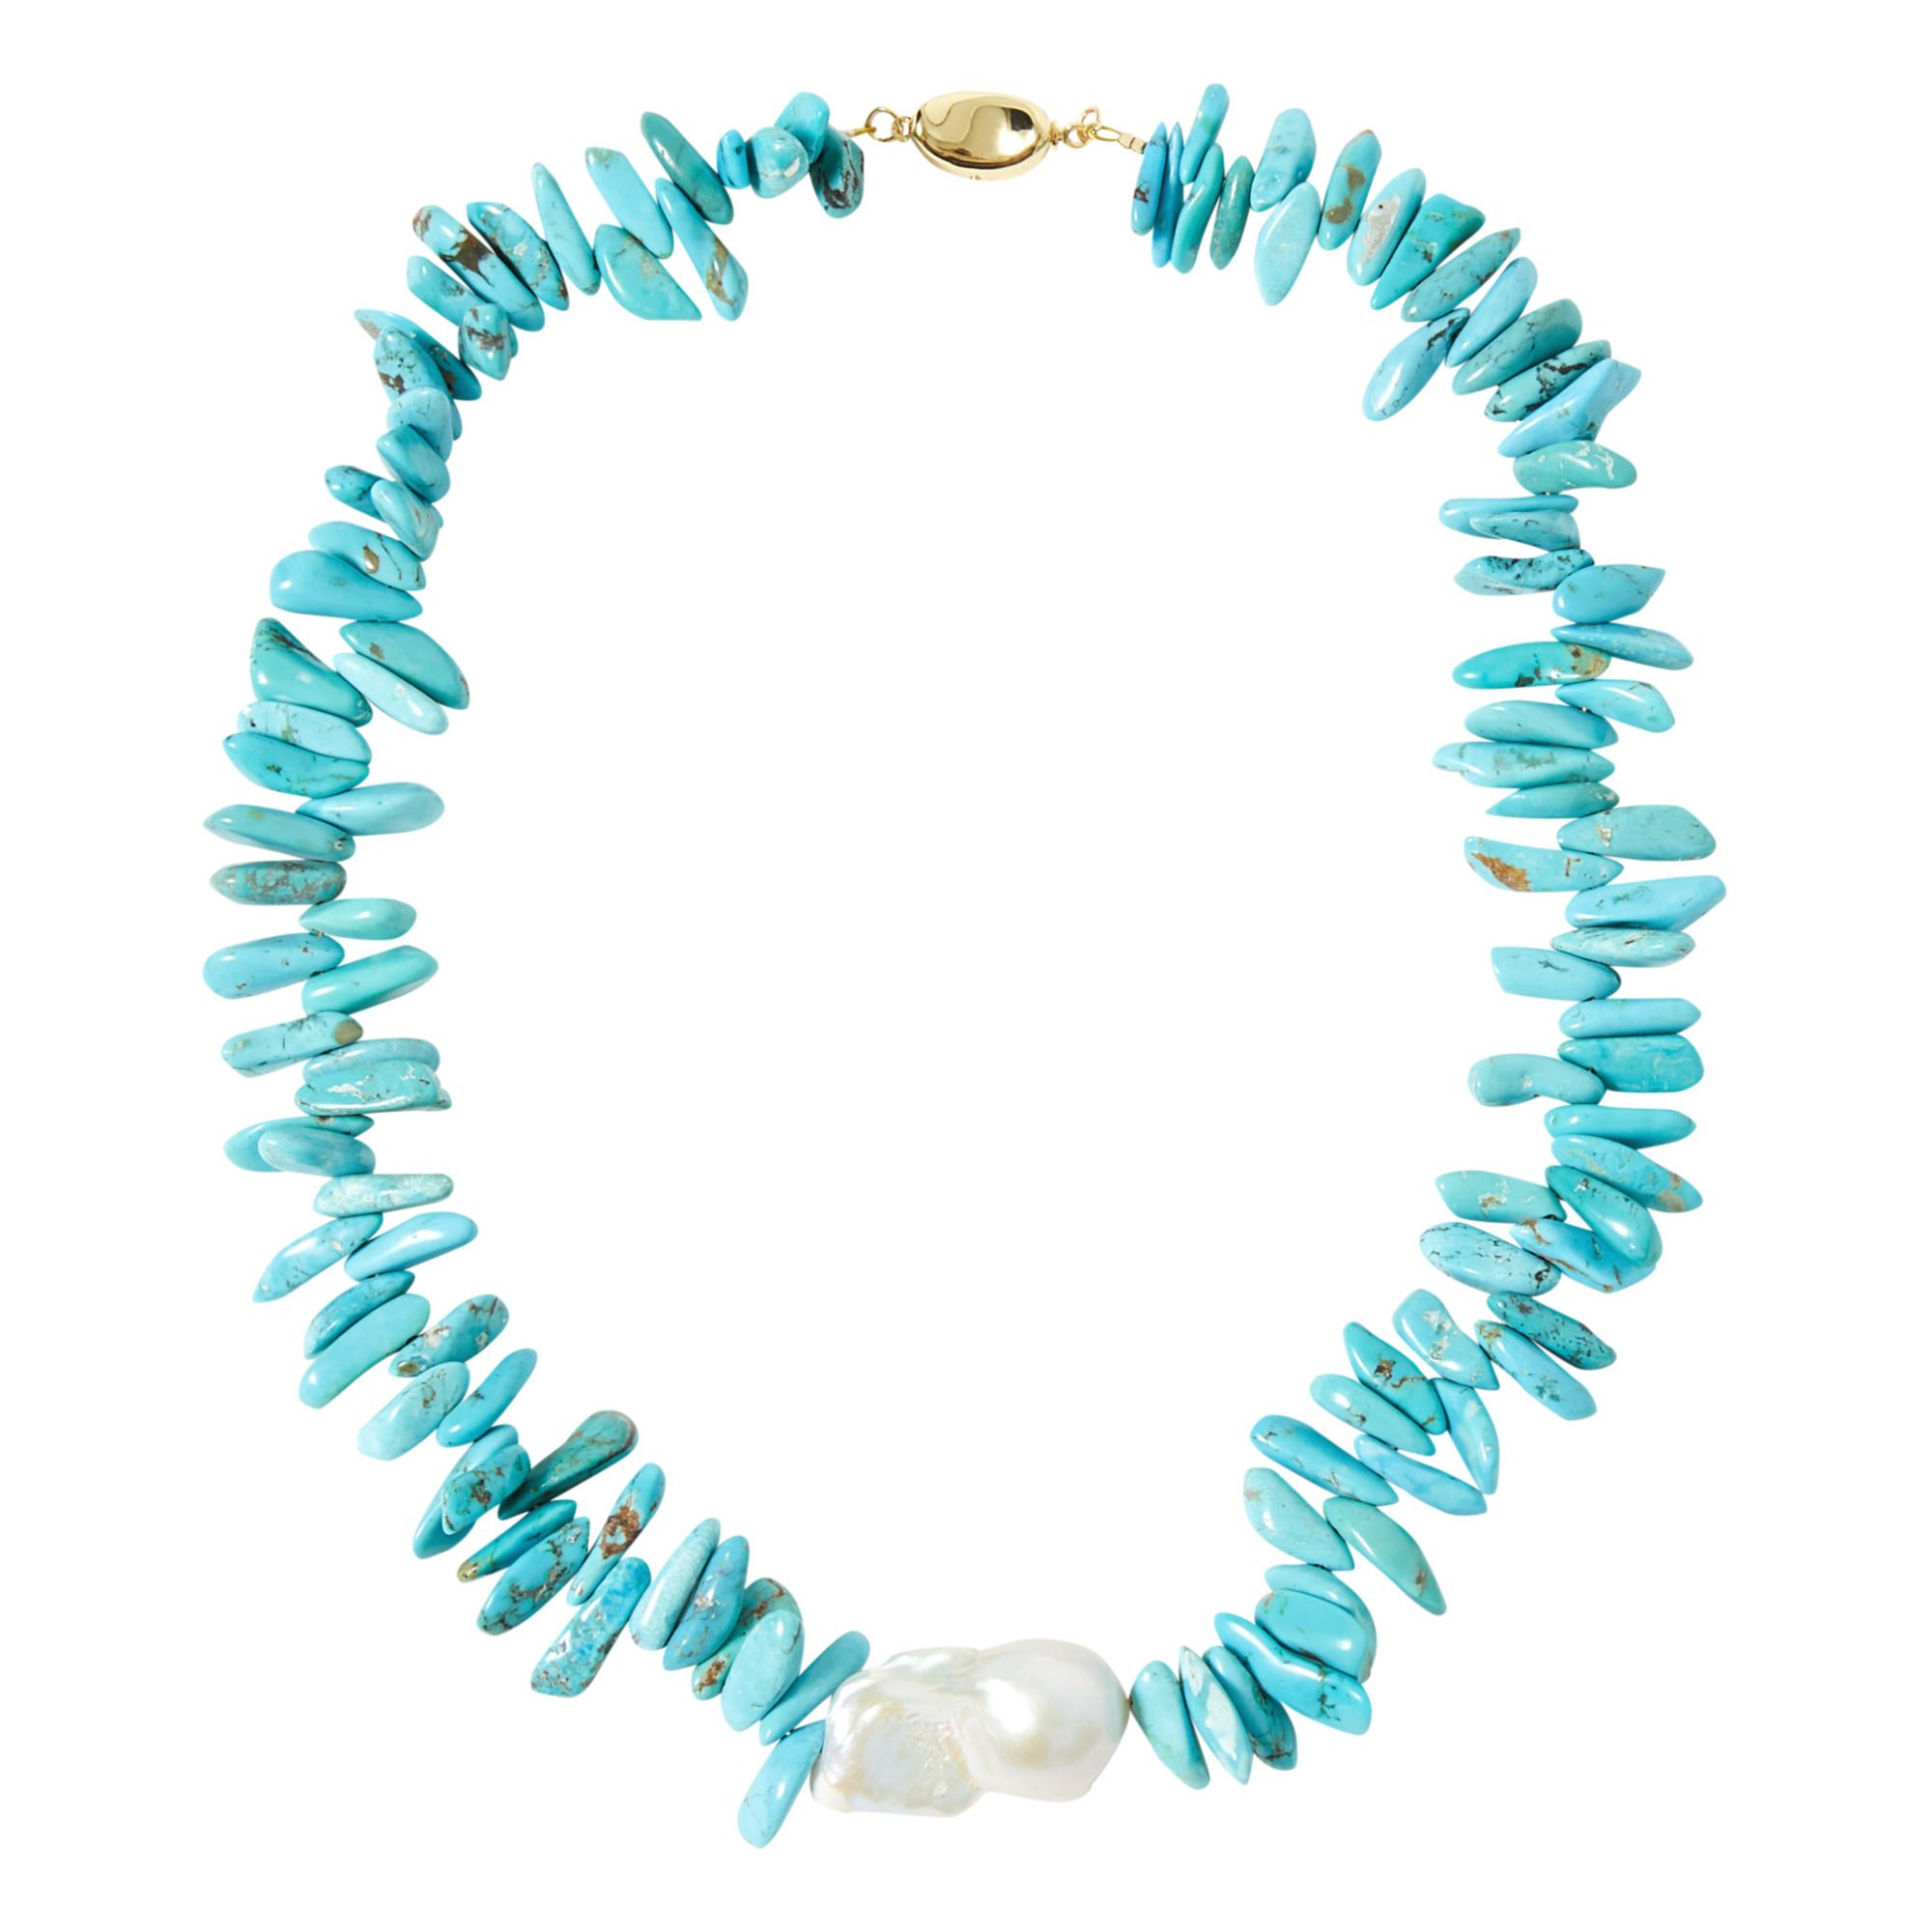 Timeless Pearly - Collier Pierre Turquoise et Perle Naturel - Femme - Bleu turquoise